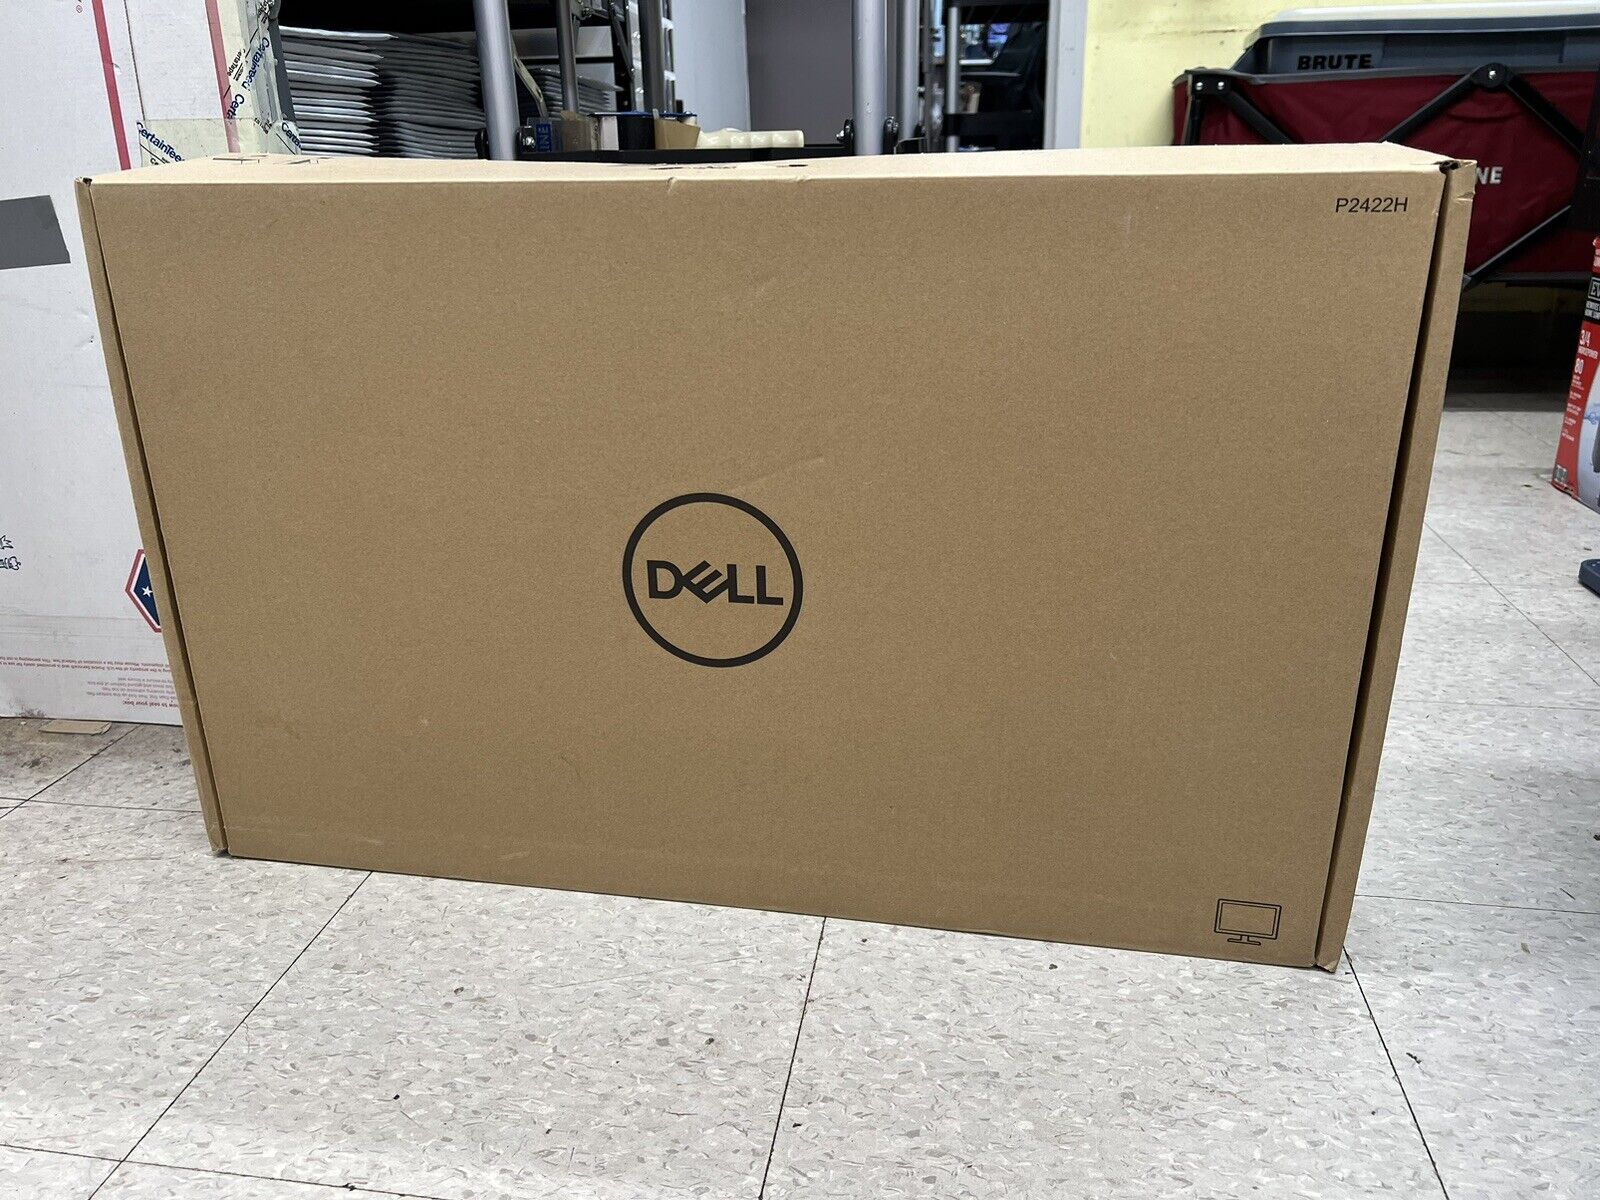 Dell P2422H 24 Monitor Full HD 1080p, IPS Technology, ComfortView New Sealed